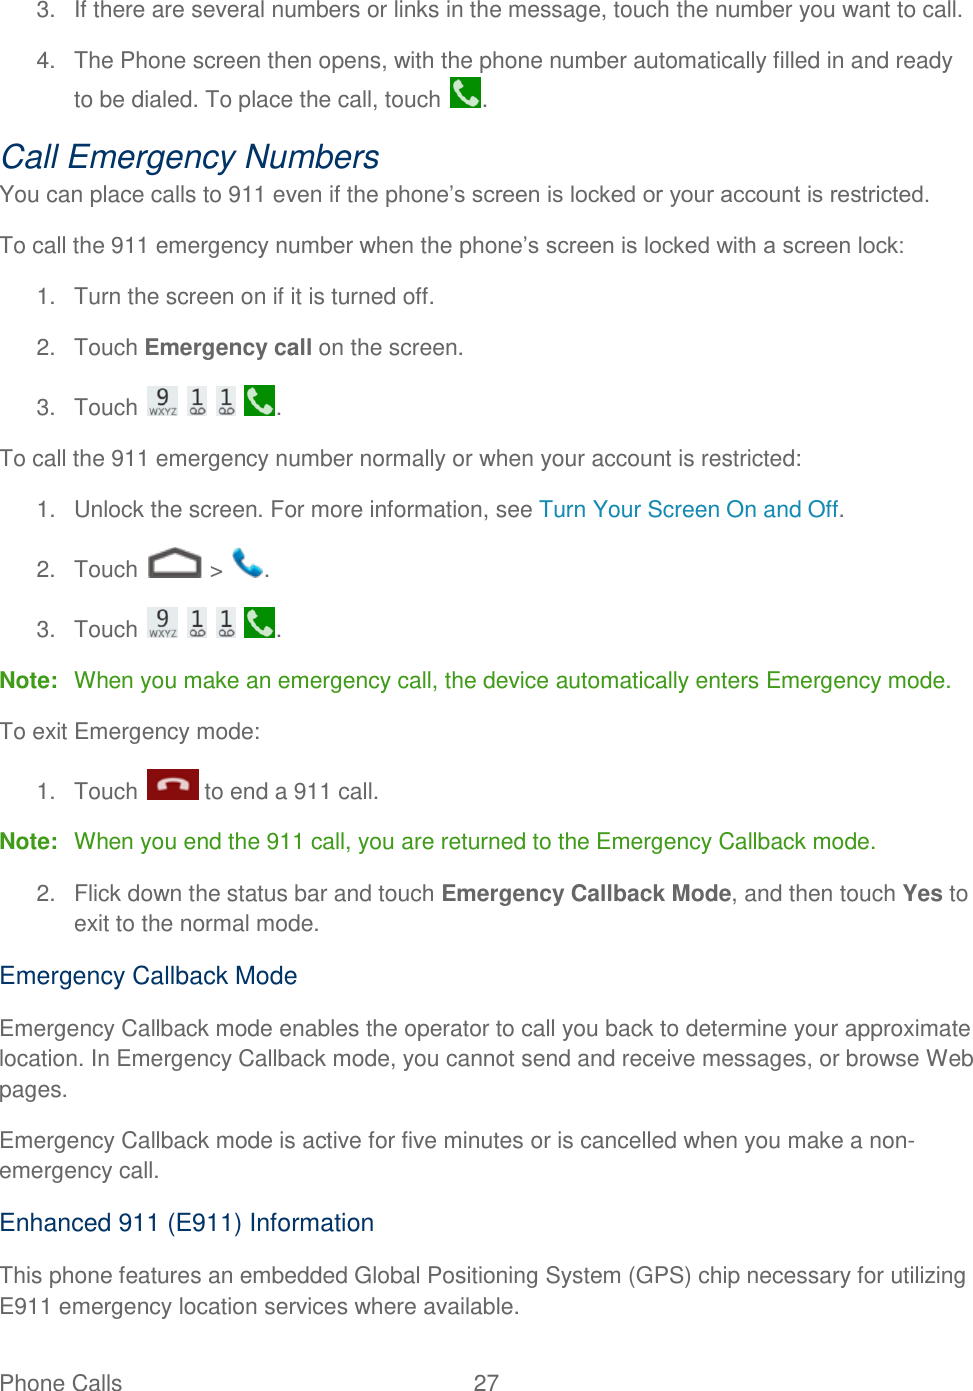 Phone Calls  27   3.  If there are several numbers or links in the message, touch the number you want to call. 4.  The Phone screen then opens, with the phone number automatically filled in and ready to be dialed. To place the call, touch  . Call Emergency Numbers You can place calls to 911 even if the phone’s screen is locked or your account is restricted. To call the 911 emergency number when the phone’s screen is locked with a screen lock: 1.  Turn the screen on if it is turned off. 2.  Touch Emergency call on the screen. 3.  Touch        . To call the 911 emergency number normally or when your account is restricted: 1.  Unlock the screen. For more information, see Turn Your Screen On and Off. 2.  Touch   &gt;  . 3.  Touch        . Note:  When you make an emergency call, the device automatically enters Emergency mode. To exit Emergency mode: 1.  Touch   to end a 911 call. Note:  When you end the 911 call, you are returned to the Emergency Callback mode. 2.  Flick down the status bar and touch Emergency Callback Mode, and then touch Yes to exit to the normal mode. Emergency Callback Mode Emergency Callback mode enables the operator to call you back to determine your approximate location. In Emergency Callback mode, you cannot send and receive messages, or browse Web pages. Emergency Callback mode is active for five minutes or is cancelled when you make a non-emergency call. Enhanced 911 (E911) Information This phone features an embedded Global Positioning System (GPS) chip necessary for utilizing E911 emergency location services where available. 